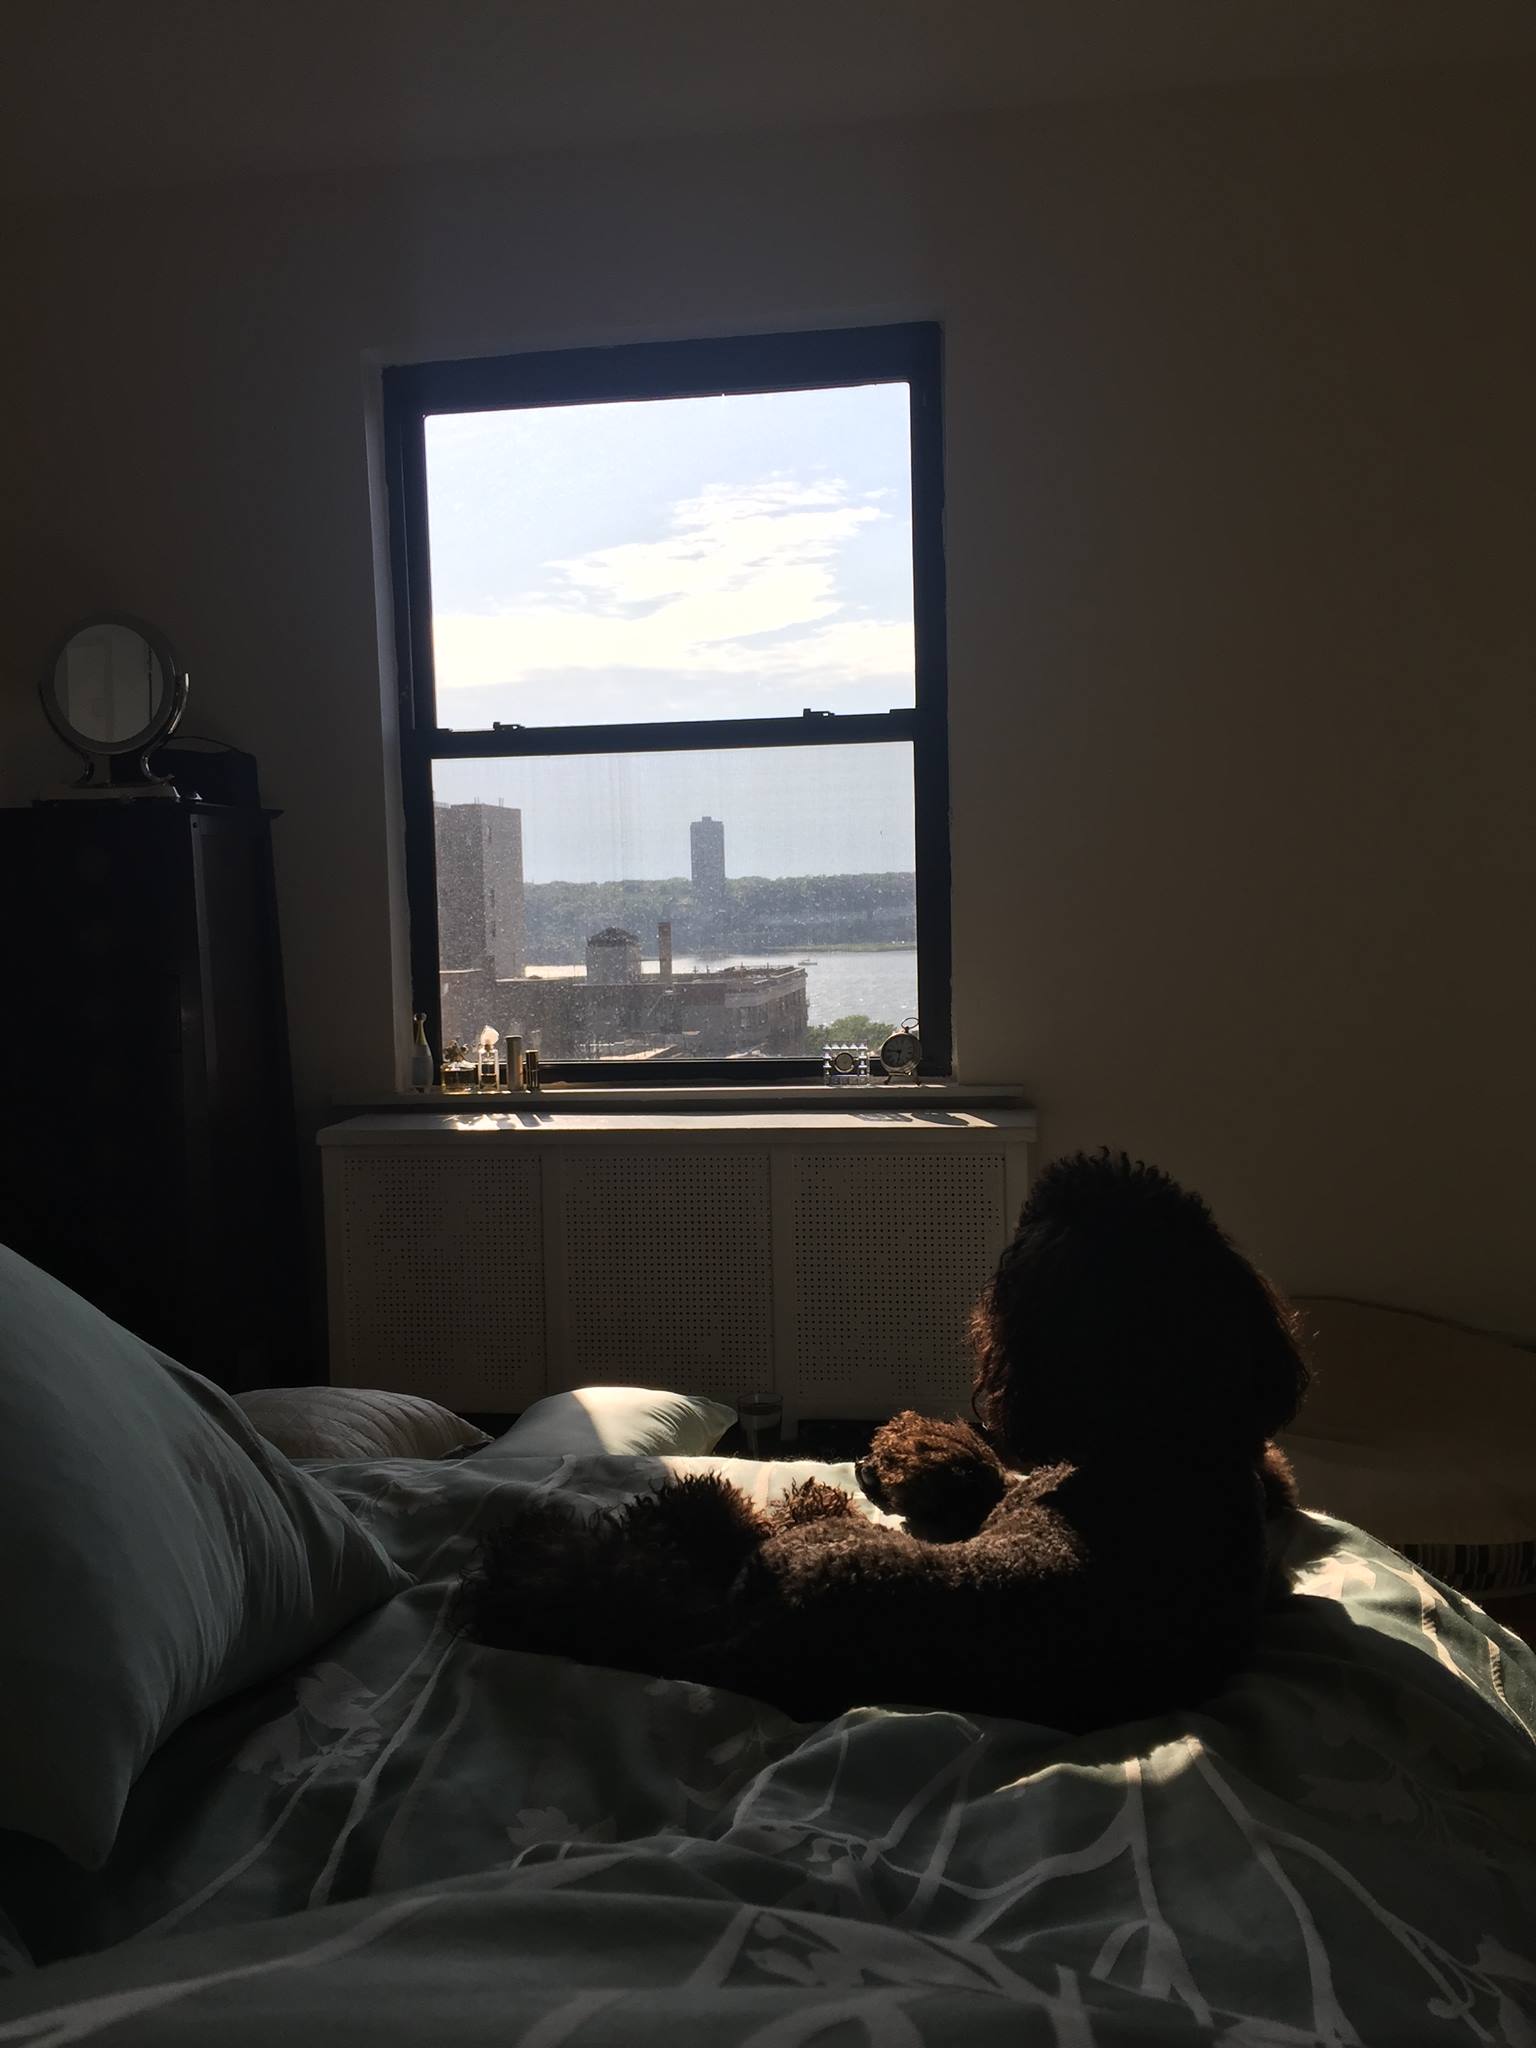 Evening, crossword, bed, poodle, sun, Hudson, New Jersey, America.